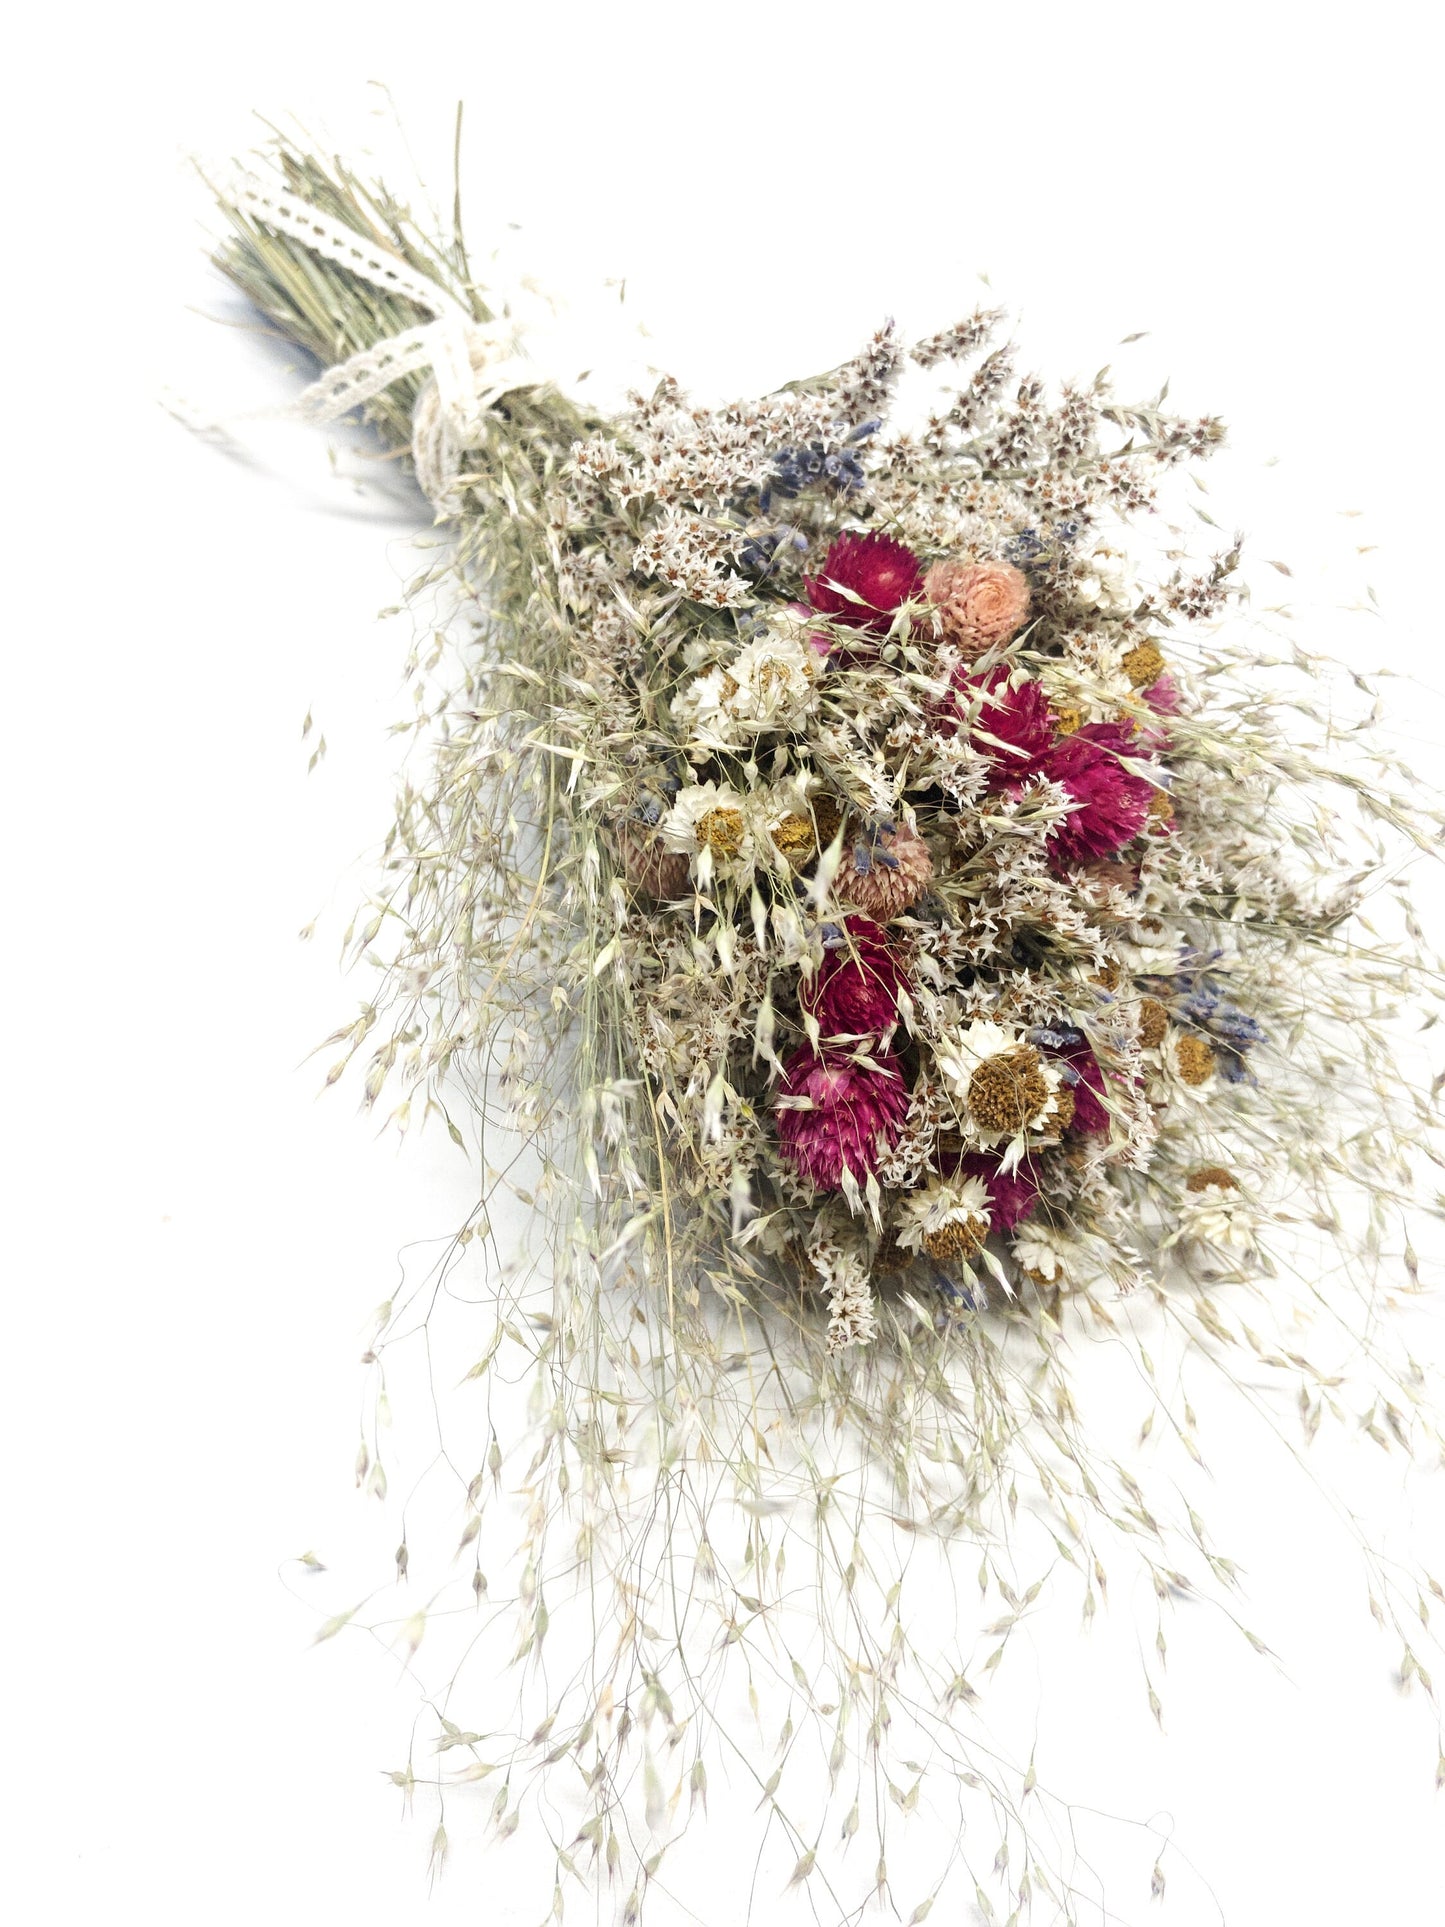 Wedding Bouquet, Dried Flowers, Spring Colors, Anniversary Gift, Present, Pink, Cream, Indian Rice, House Decor, Hair Comb, Head Wreath